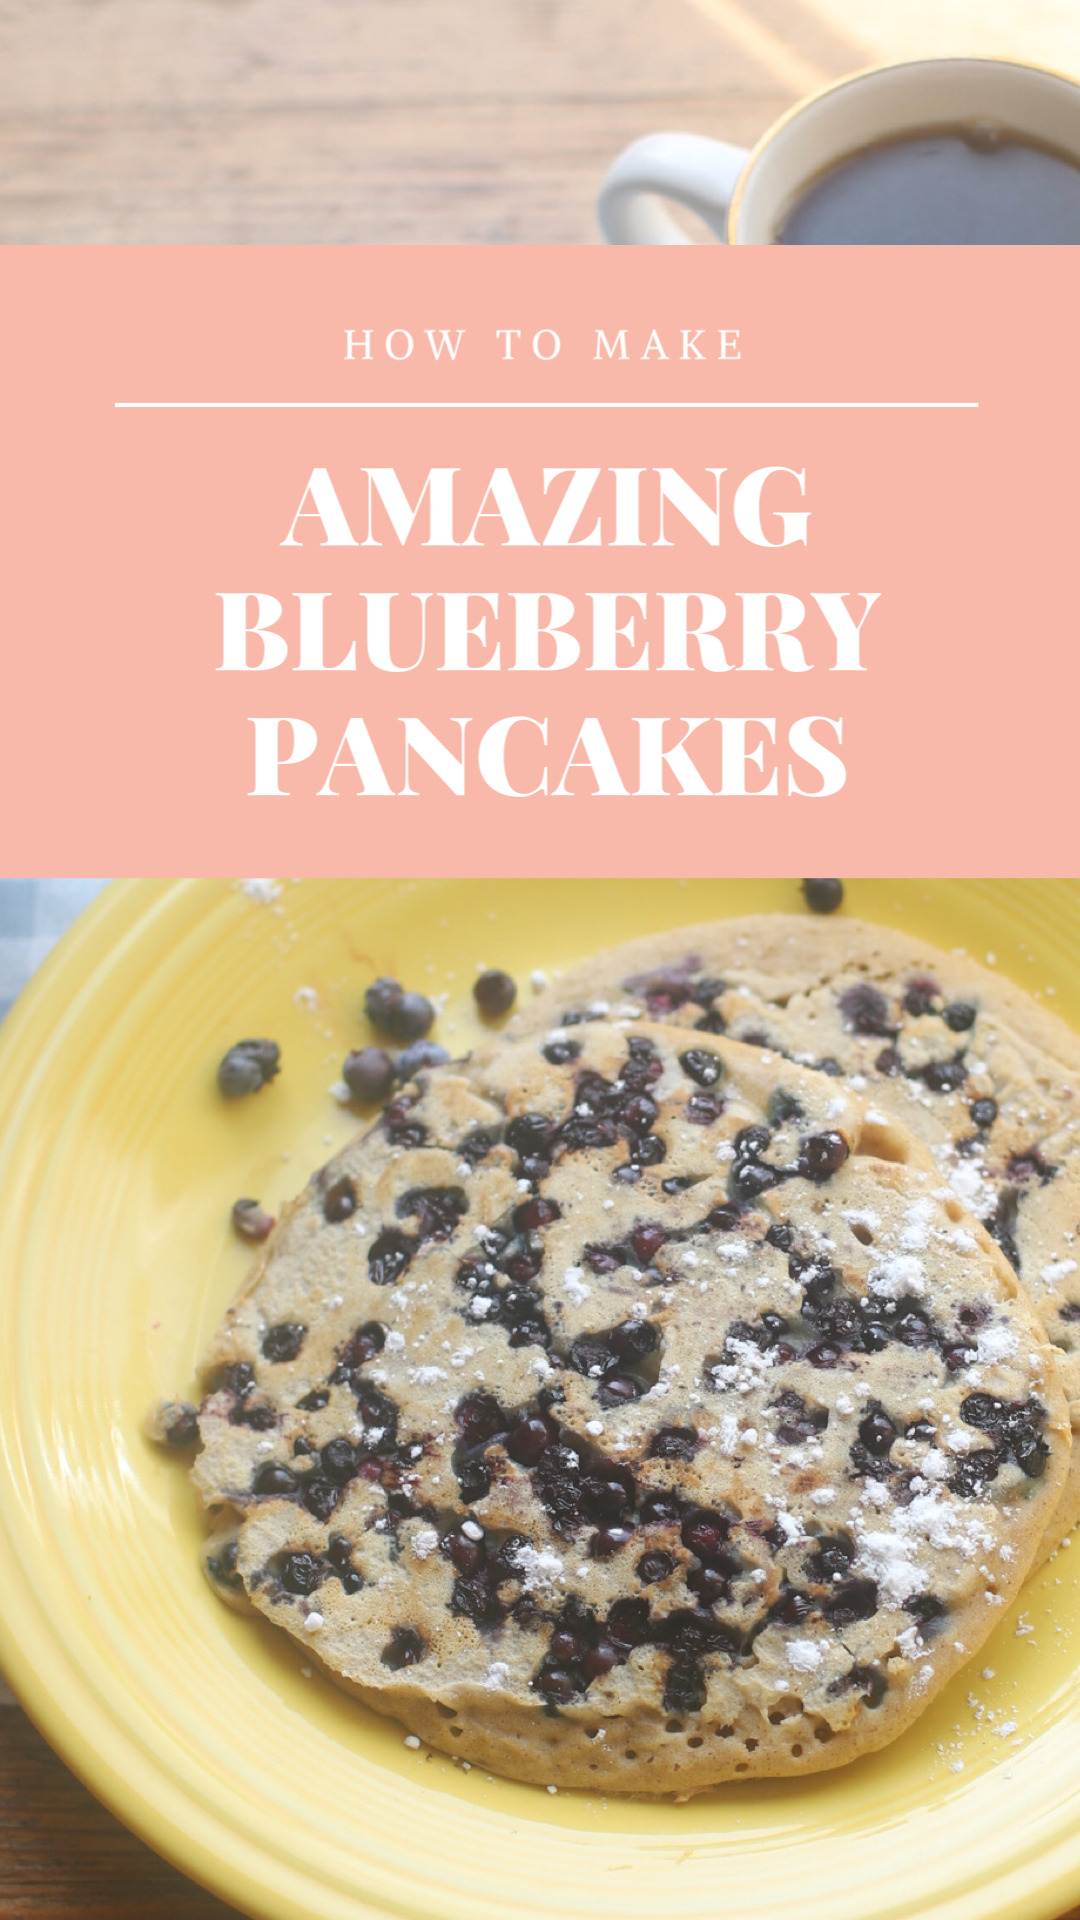 Light, fluffy, and easily our favorite pancake recipe, these birthday blueberry pancakes, bursting with fragrant Maine blueberries, are epically delicious. These pancakes are also incredible plain, with chocolate chips, or any other favorite mix-ins. (They‘re also the perfect celebratory pancakes!) | @glitterinclexi | GLITTERINC.COM